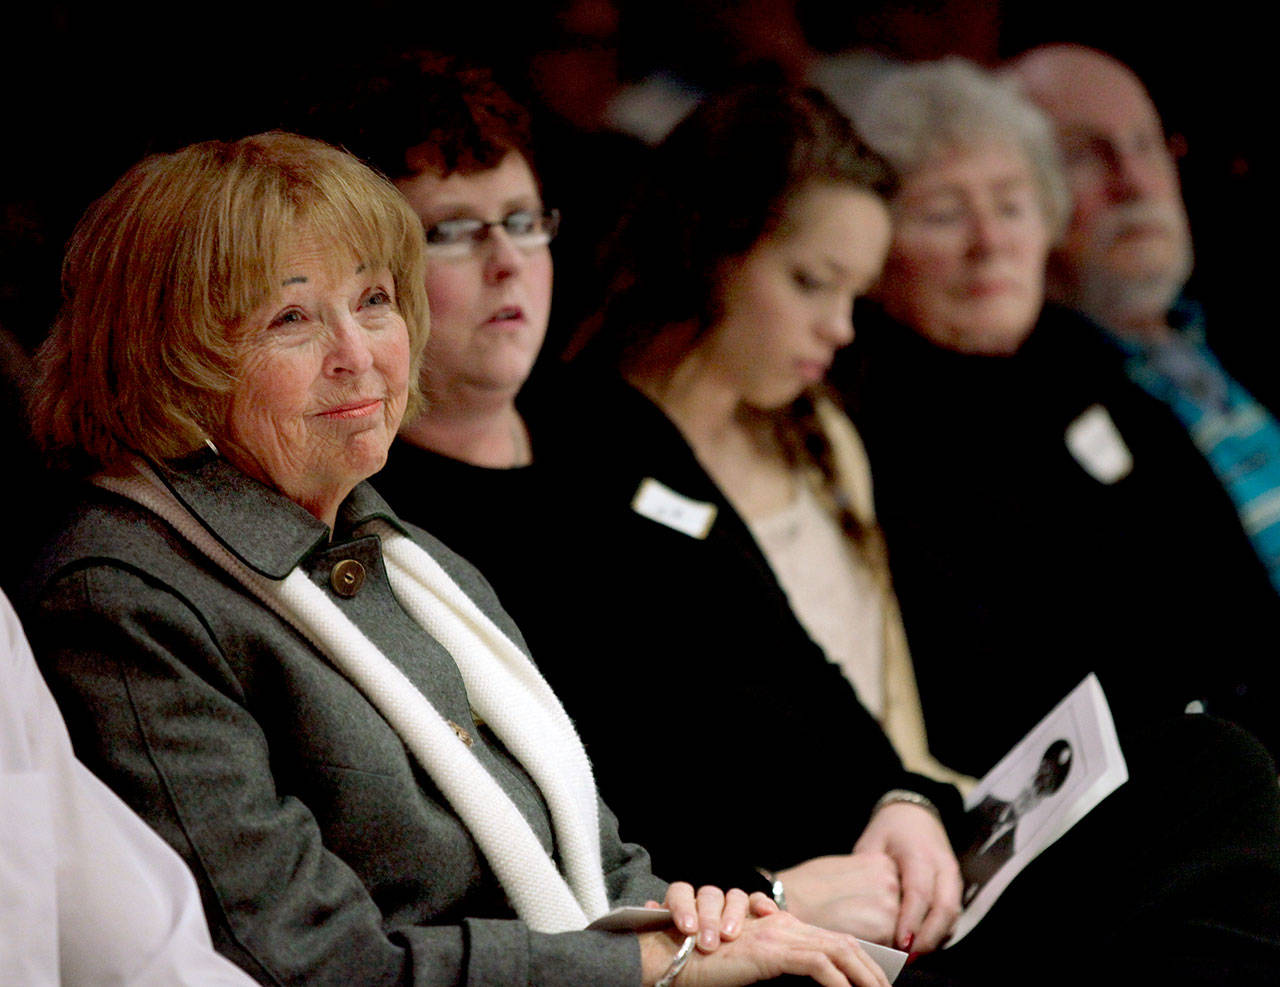 Kathy Parks and family members listen to speakers during the Gary Parks Remembrance ceremony at Everett Community College in 2012. From left: Kathy Parks, daughter Jennifer Parks, granddaughter Marissa Van Ry, Carol and bother John Parks. (Michael O’Leary / Herald file)